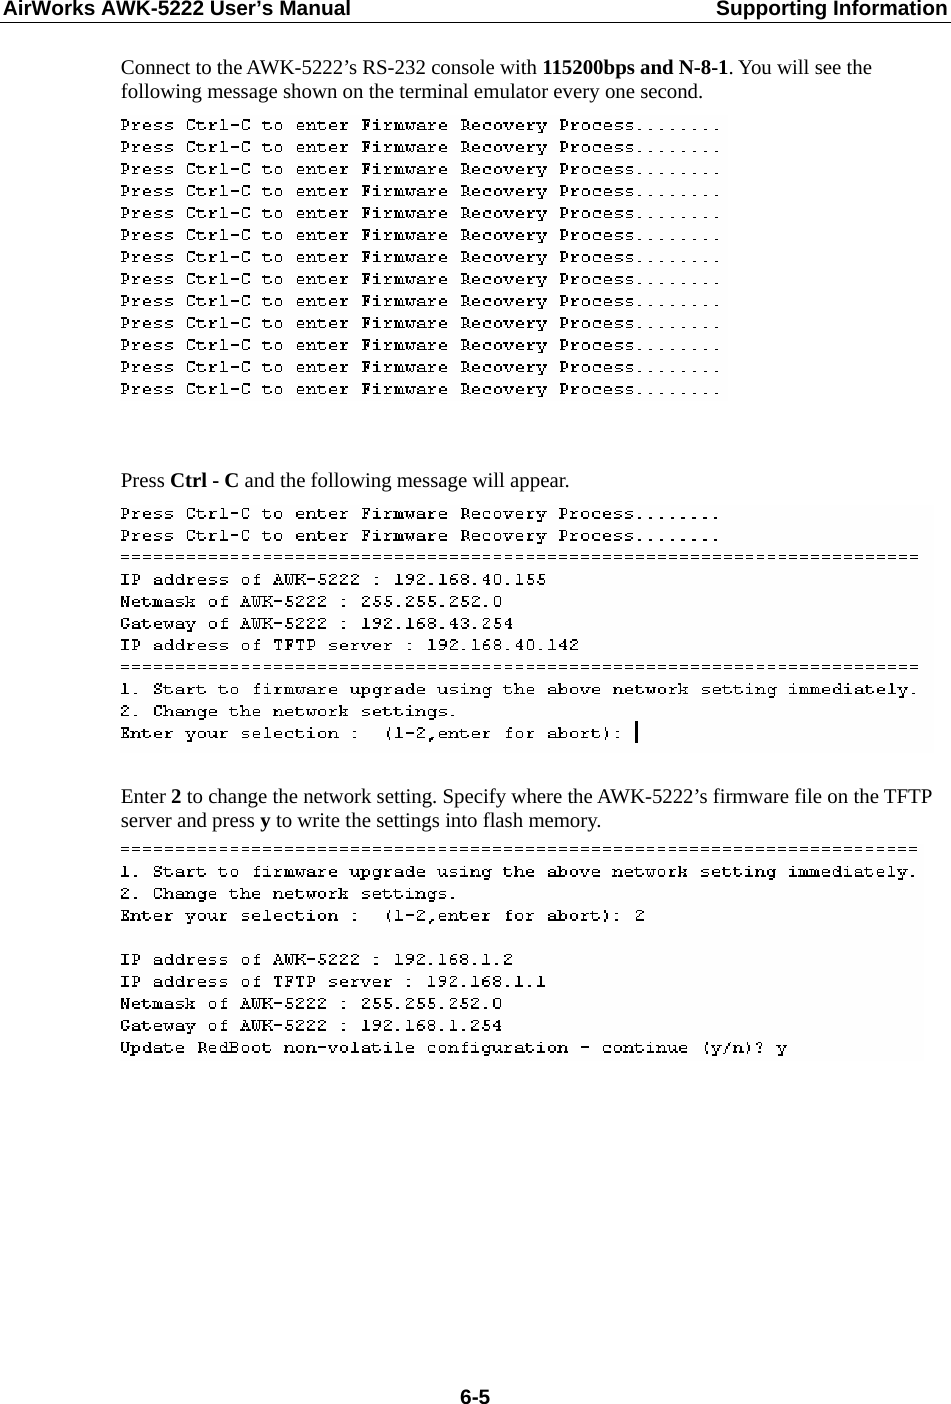 AirWorks AWK-5222 User’s Manual  Supporting Information  6-5Connect to the AWK-5222’s RS-232 console with 115200bps and N-8-1. You will see the following message shown on the terminal emulator every one second.    Press Ctrl - C and the following message will appear.   Enter 2 to change the network setting. Specify where the AWK-5222’s firmware file on the TFTP server and press y to write the settings into flash memory.            